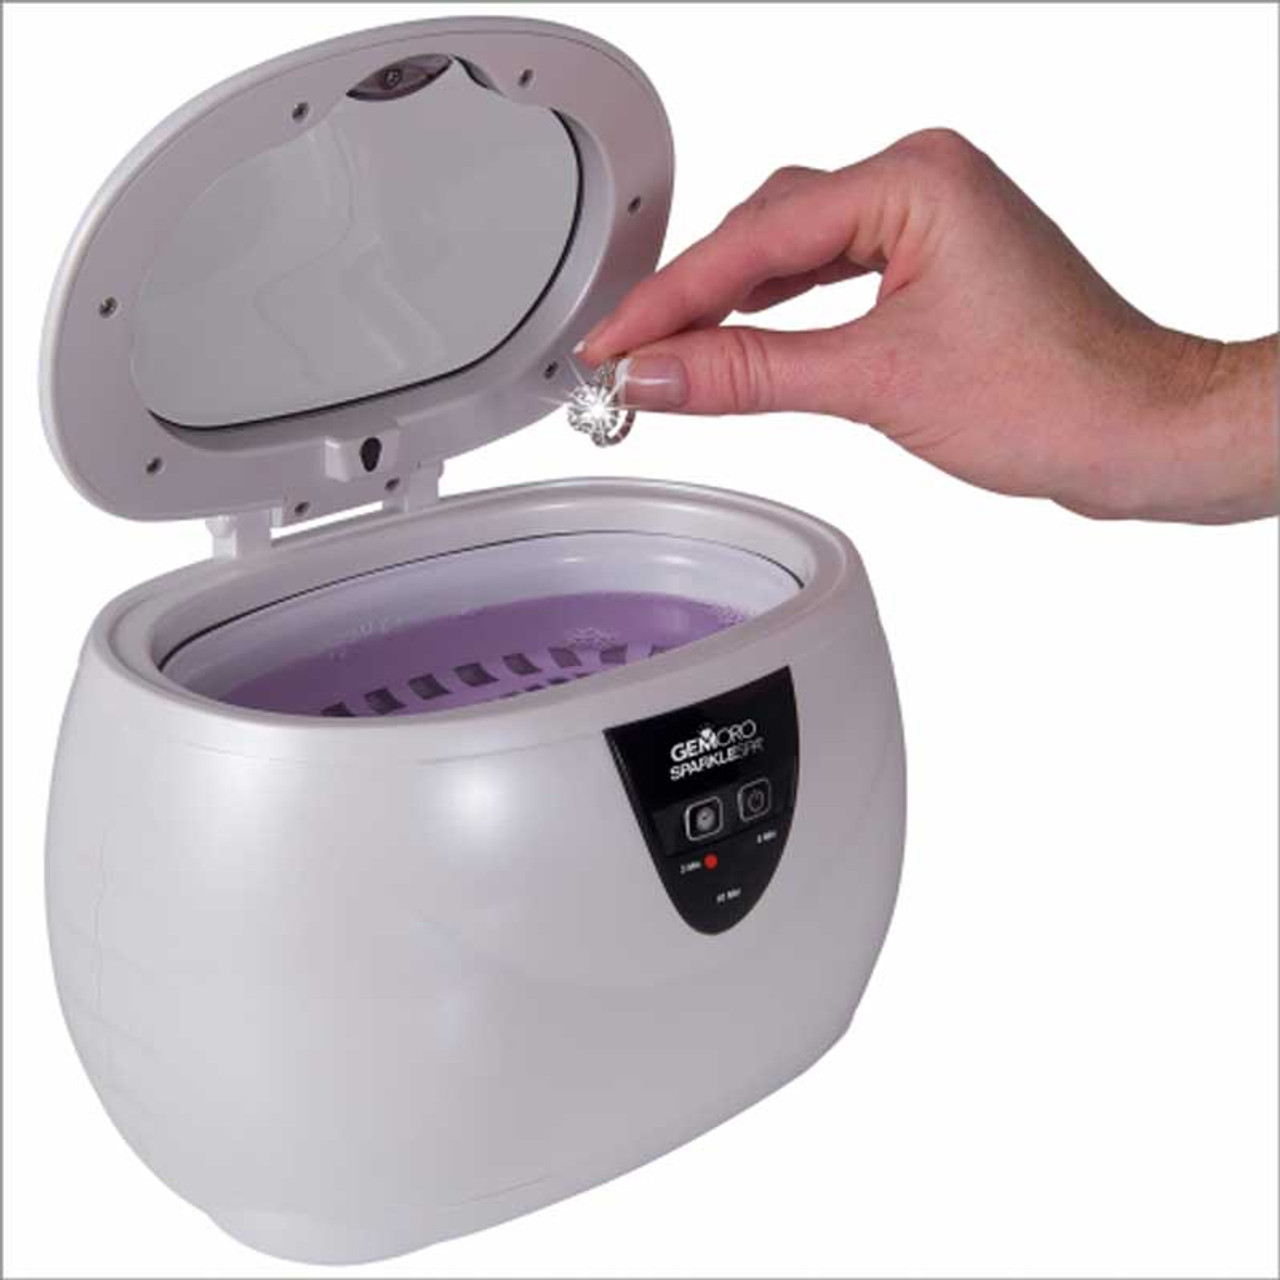 GemOro Ultrasonic Jewelry Cleaner Solution-Concentrate-Quart